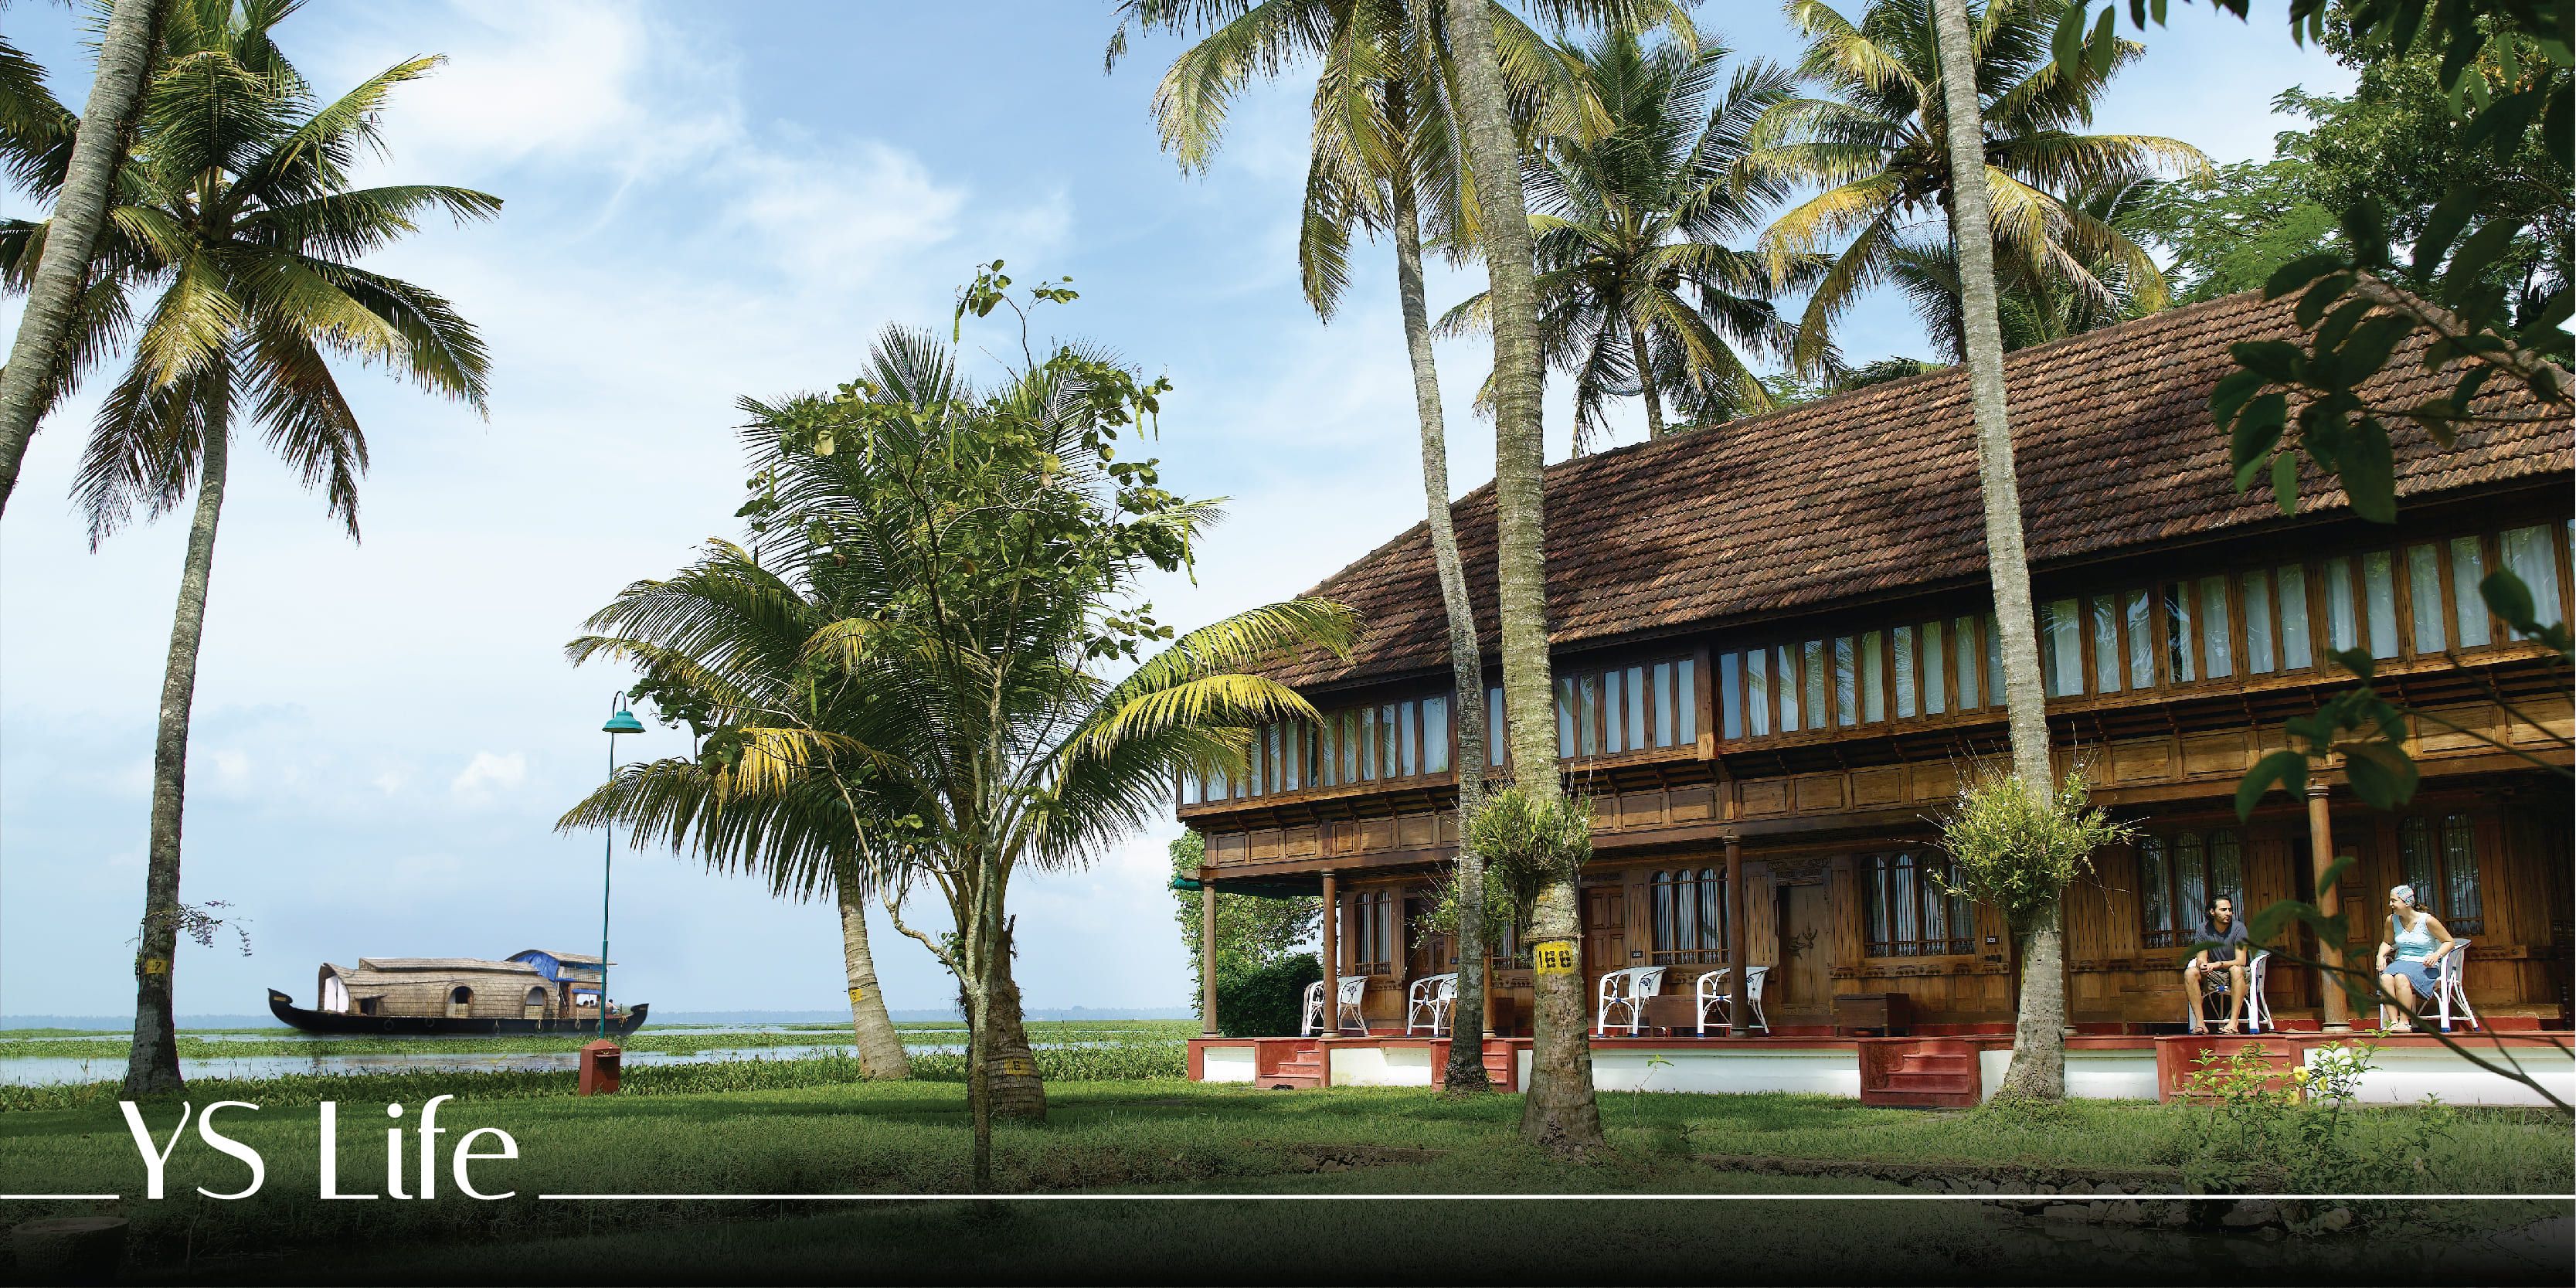 Experience the Kuttanad life at Coconut Lagoon, a luxury resort in the lap of nature